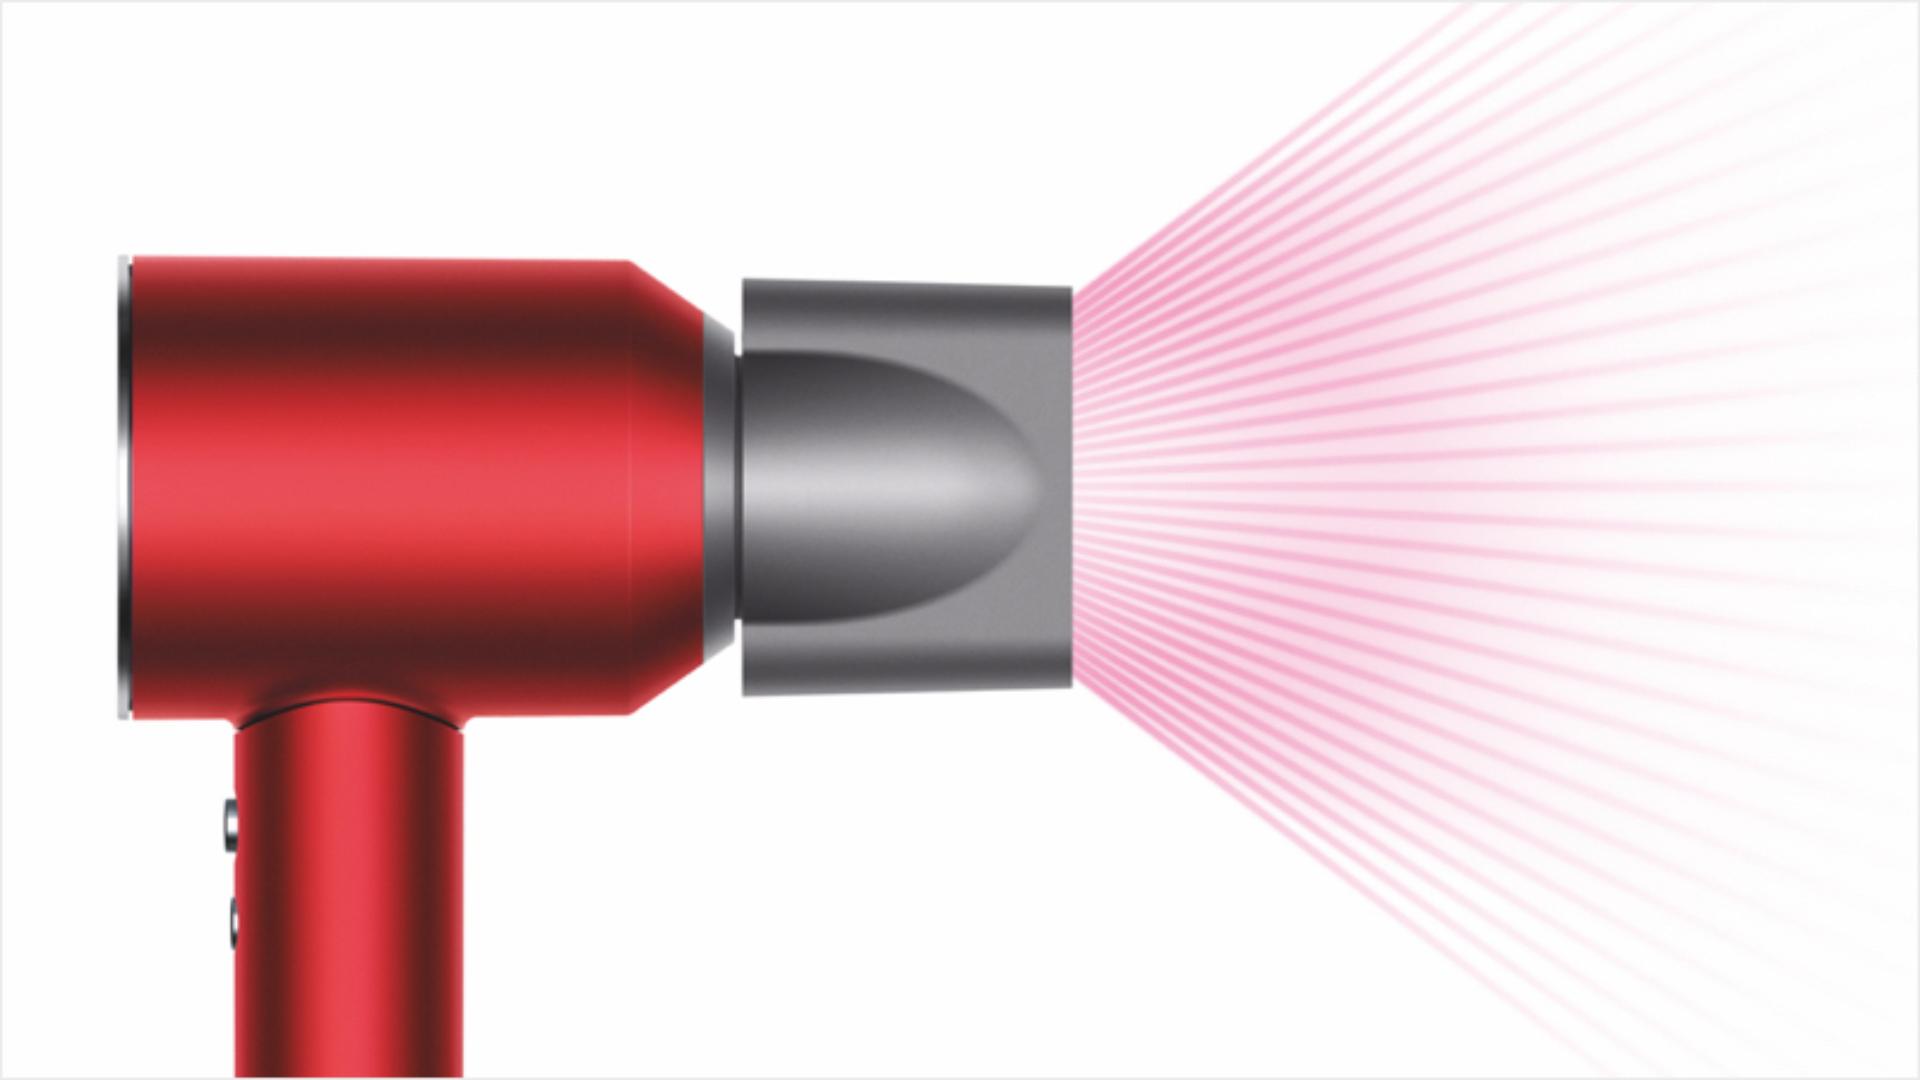 Dyson Supersonic™ hair dryer with Smoothing nozzle attached